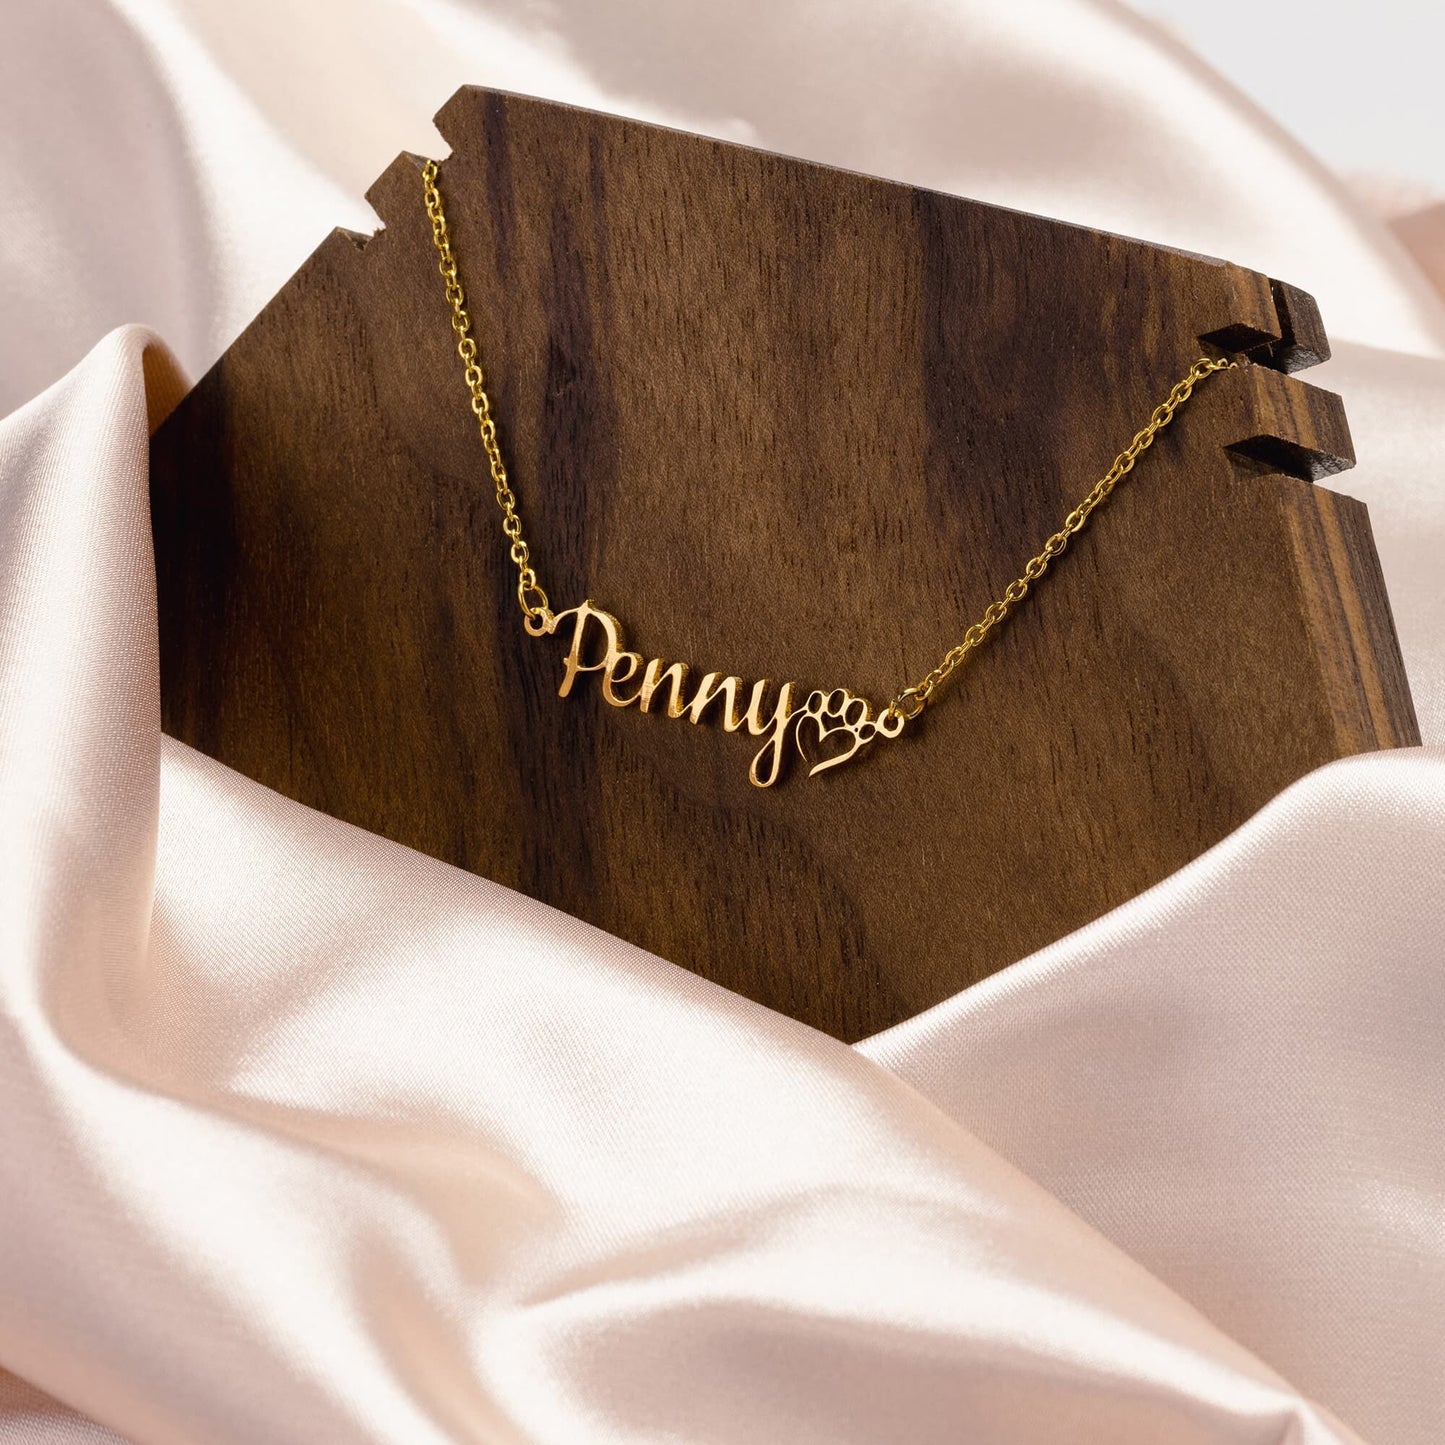 Paws to See This Beautiful Necklace - Wear This Necklace With Your Dog's Name Everywhere You Go